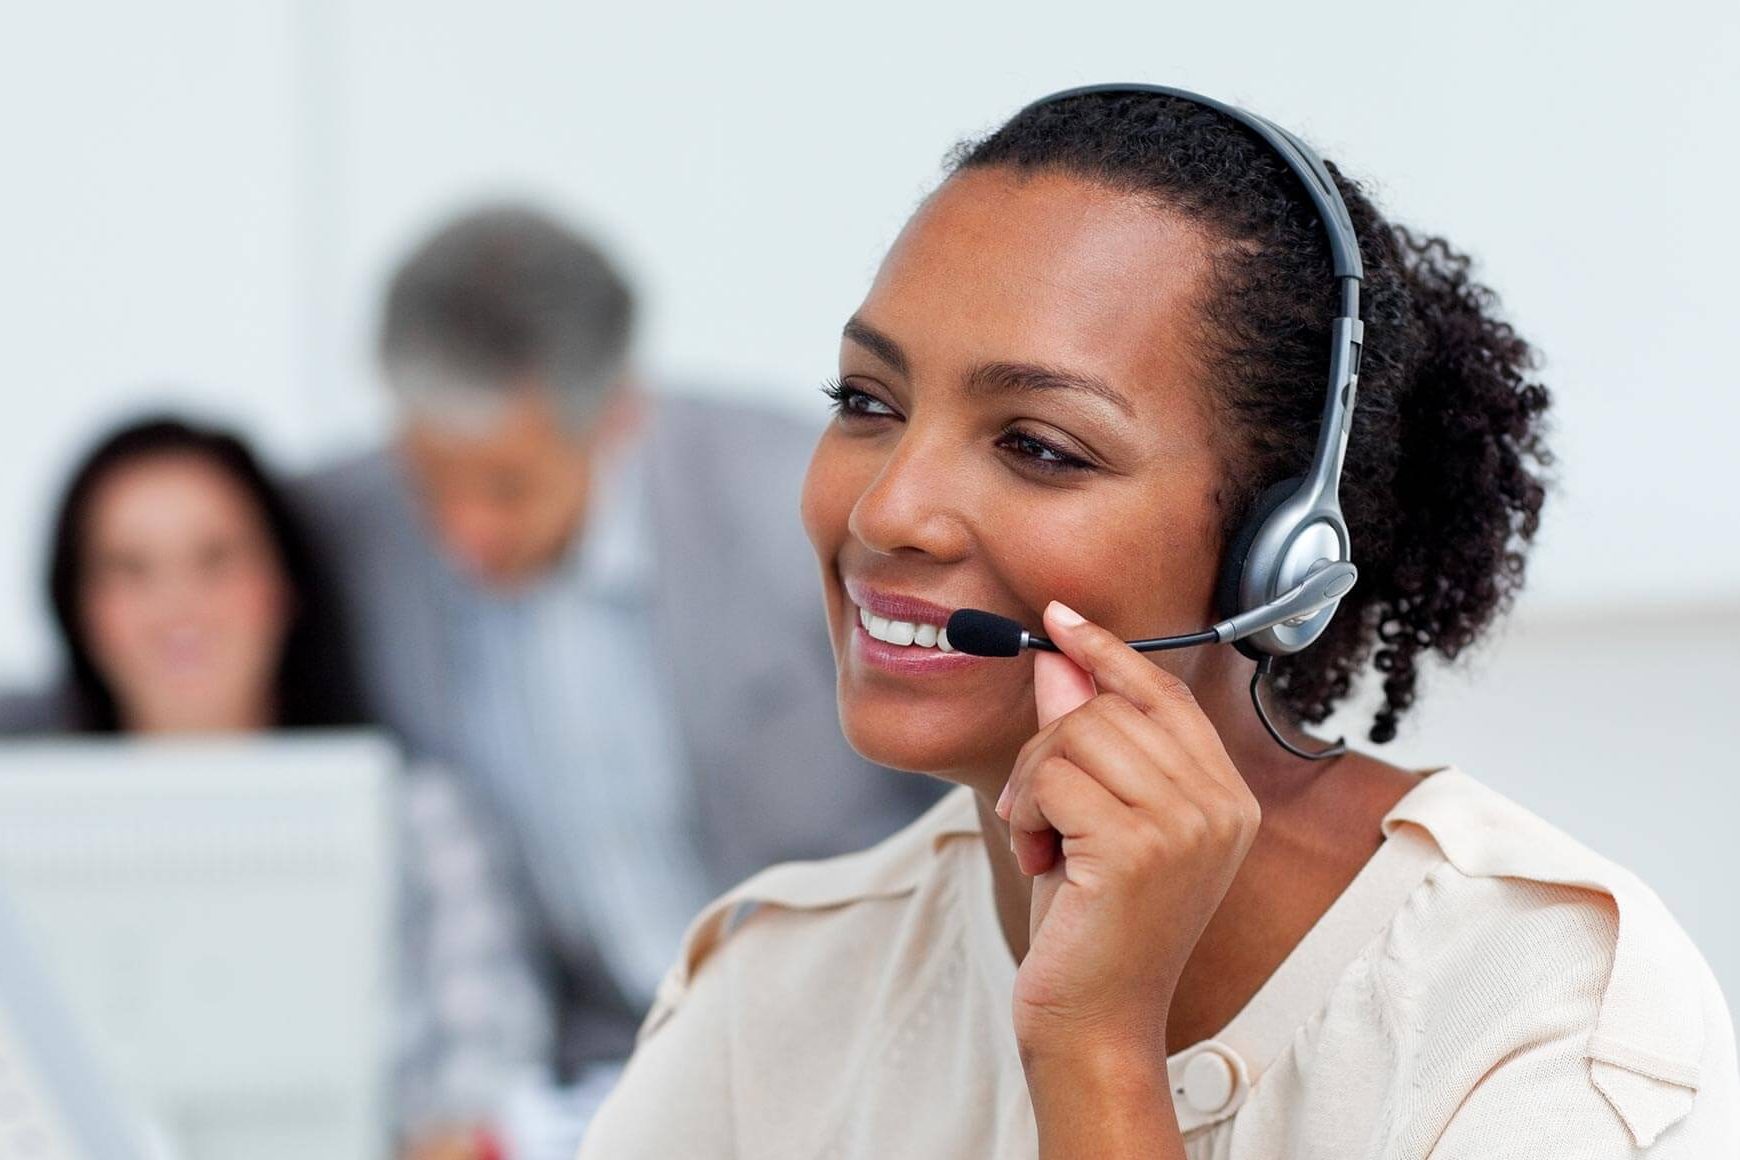 Choosing Priority While Customer Support Can Be Highly Beneficial For Business